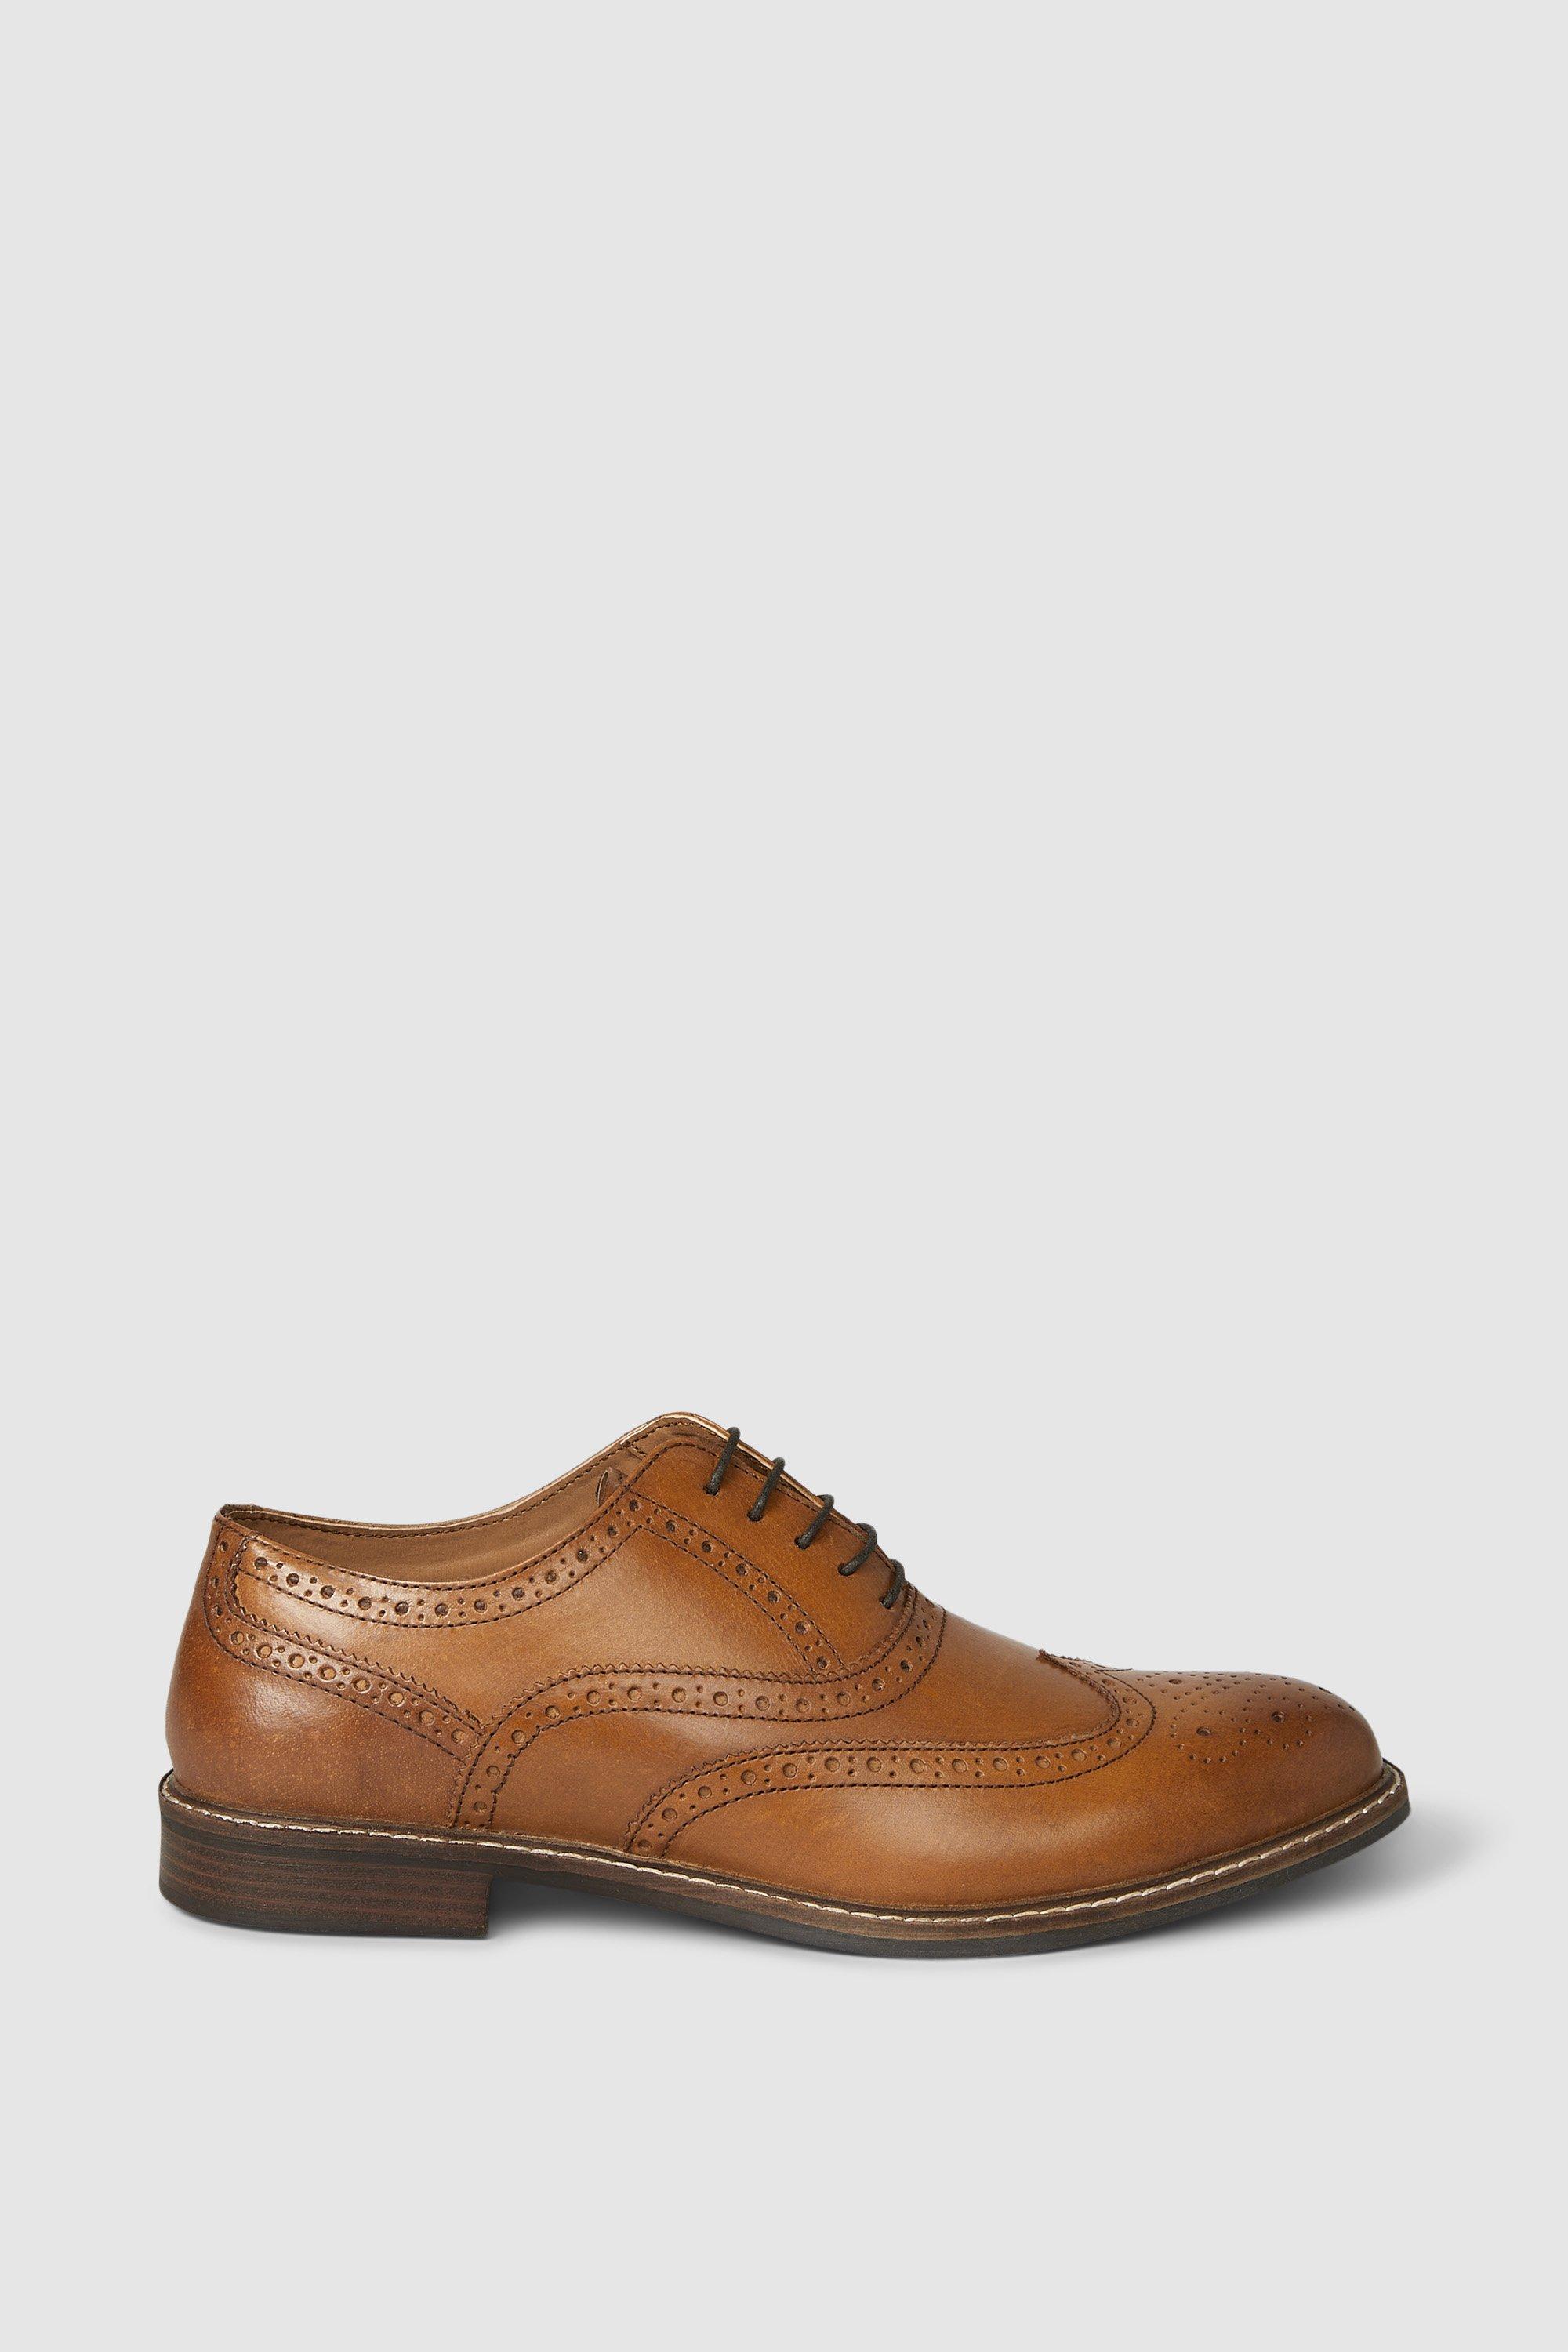 Red Tape Mens Cardew Brogues 